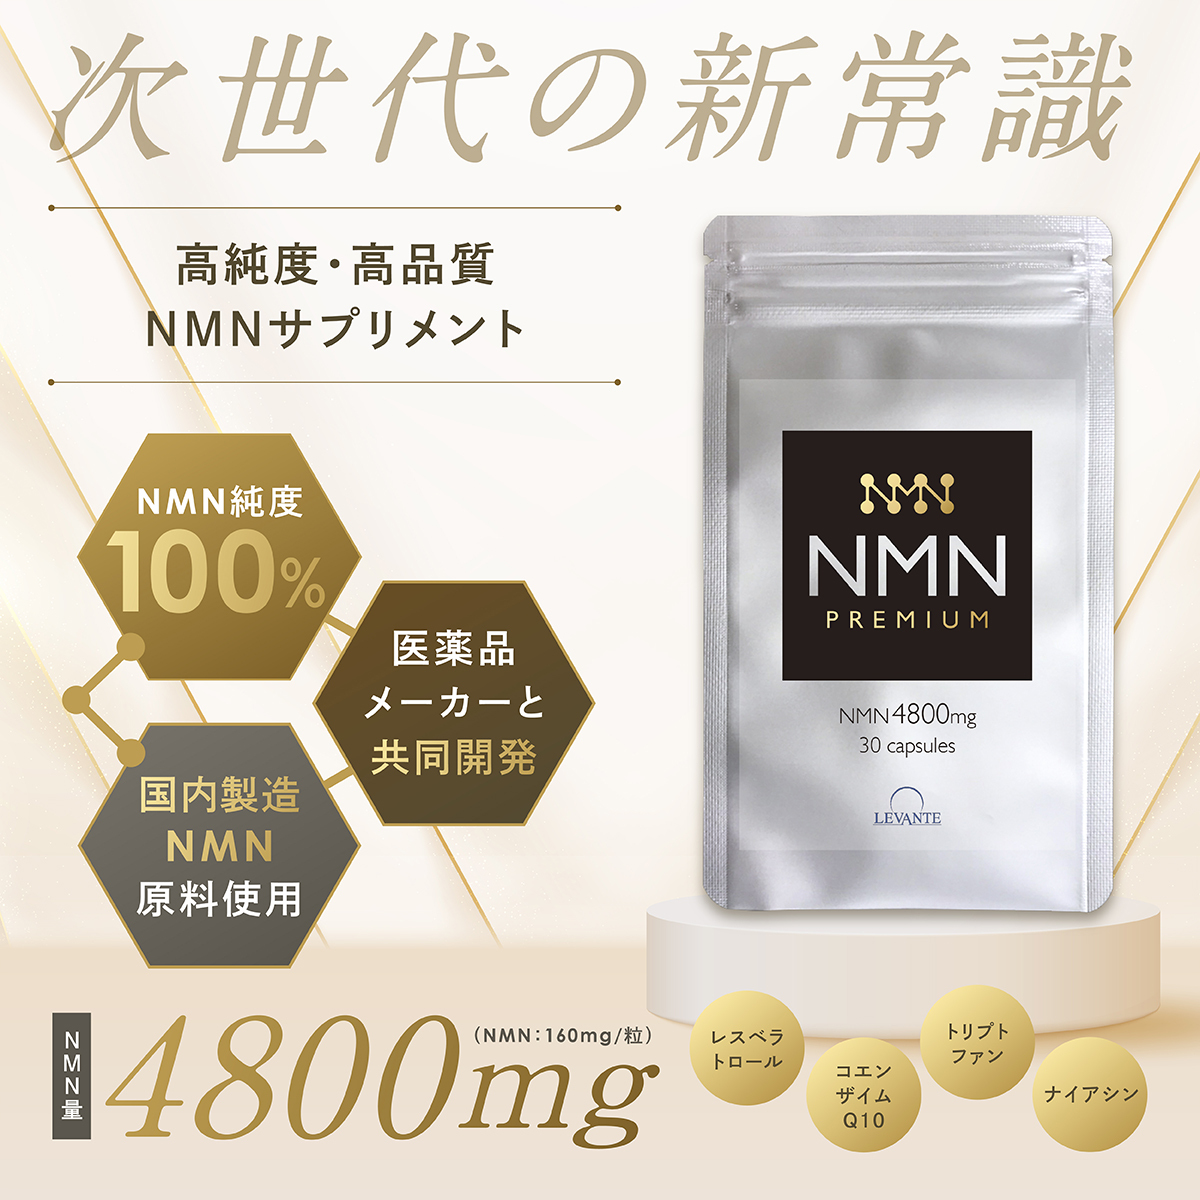 [ ingredient amount analysis settled ] NMN supplement made in Japan 4800mg 1 months minute high purity 100% restoration type coenzyme Q10 Levante nmn supplement beauty F